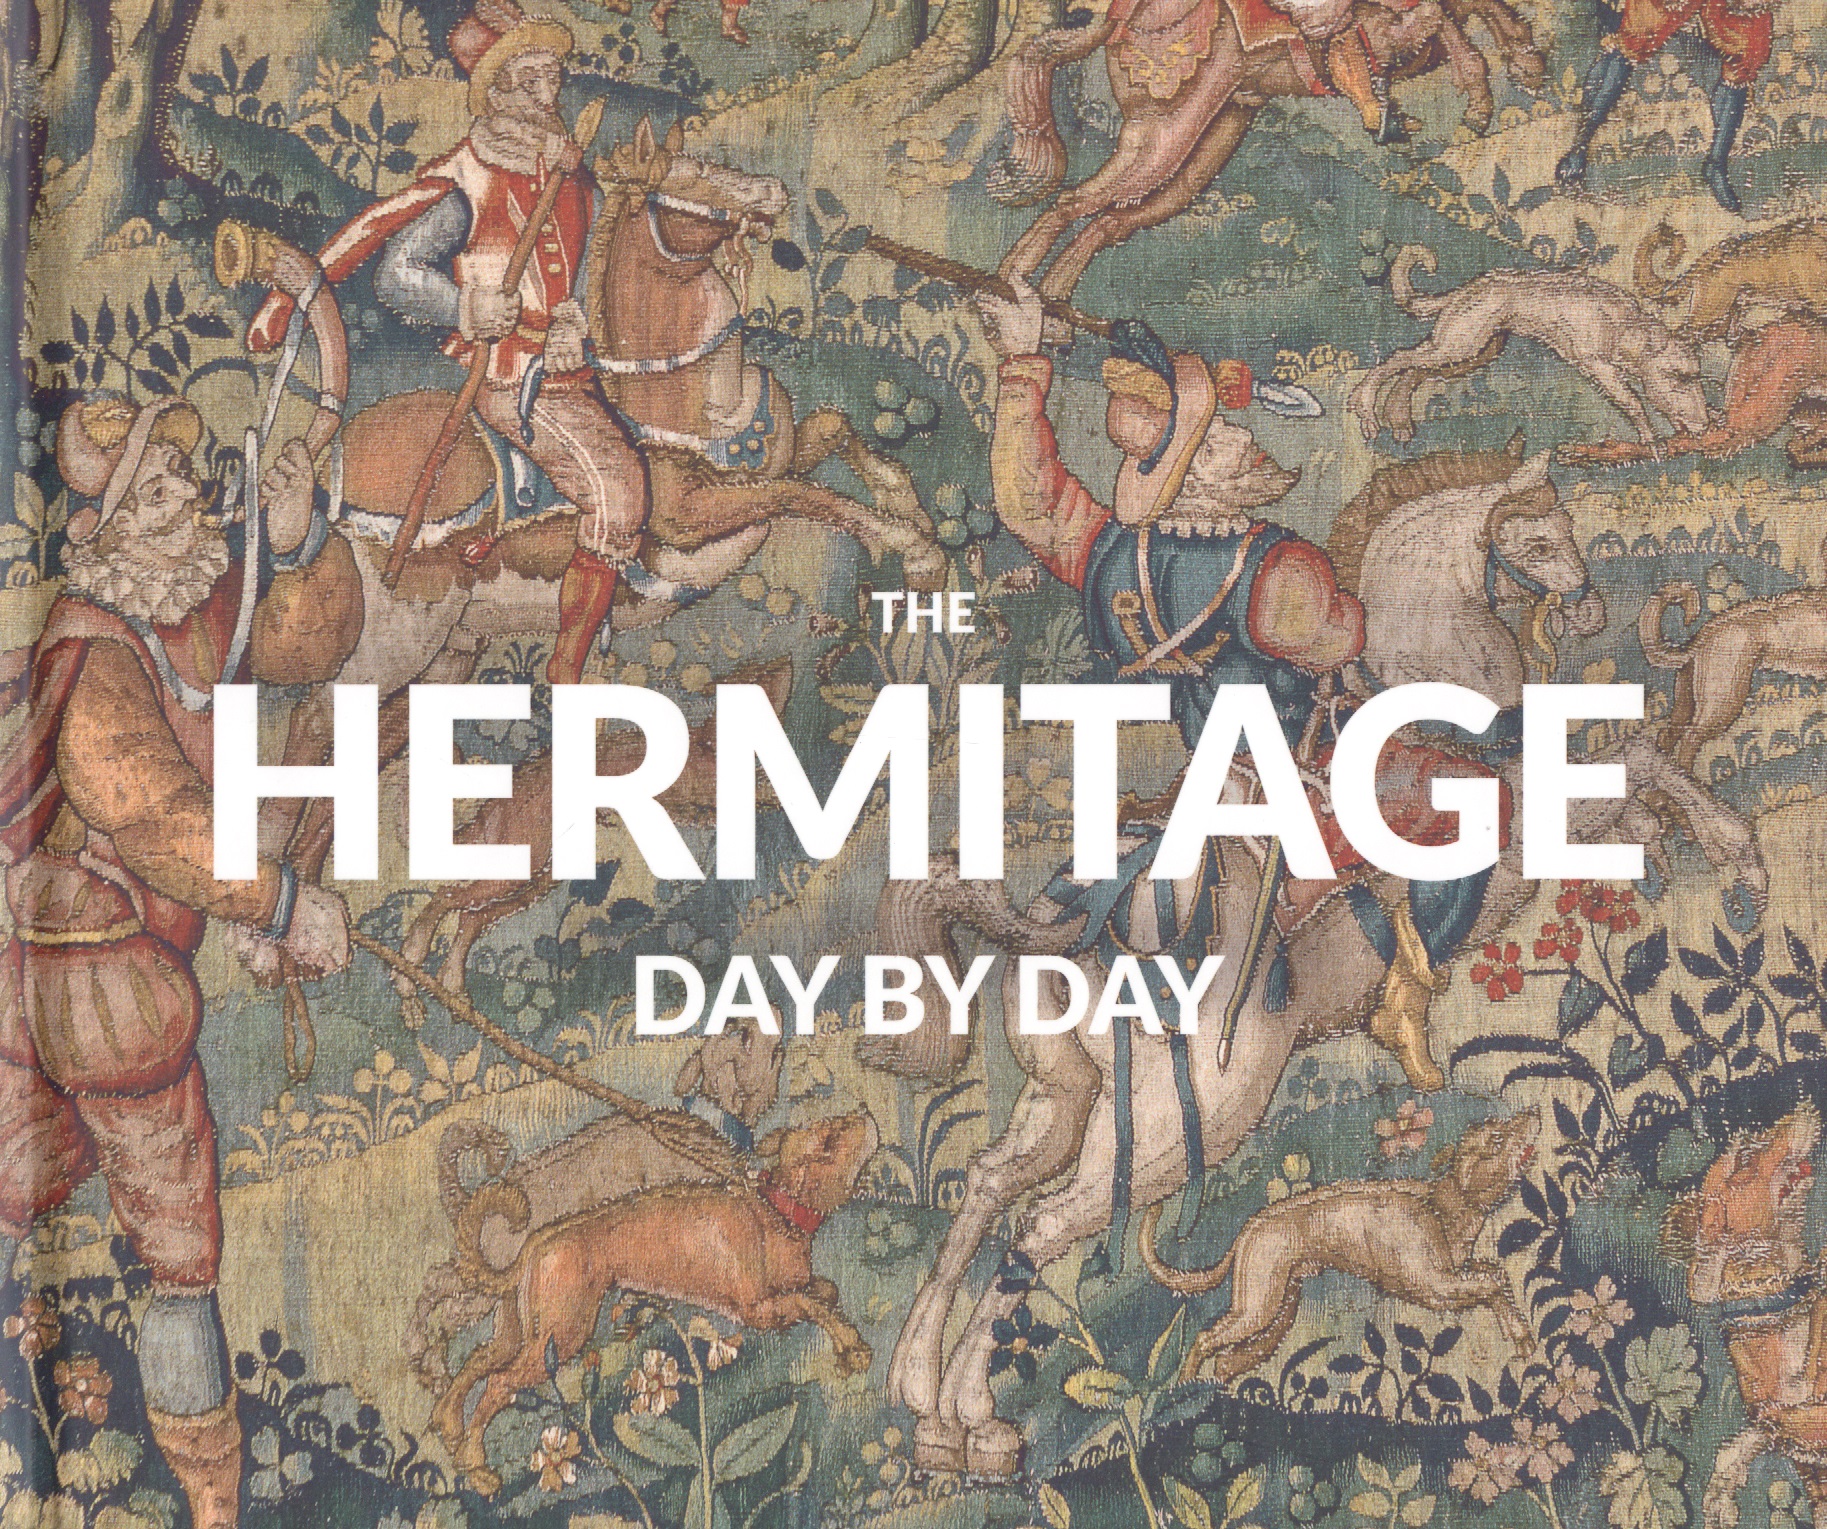 The Hermitage. Day by Day animal abc book from the state hermitage museum collection